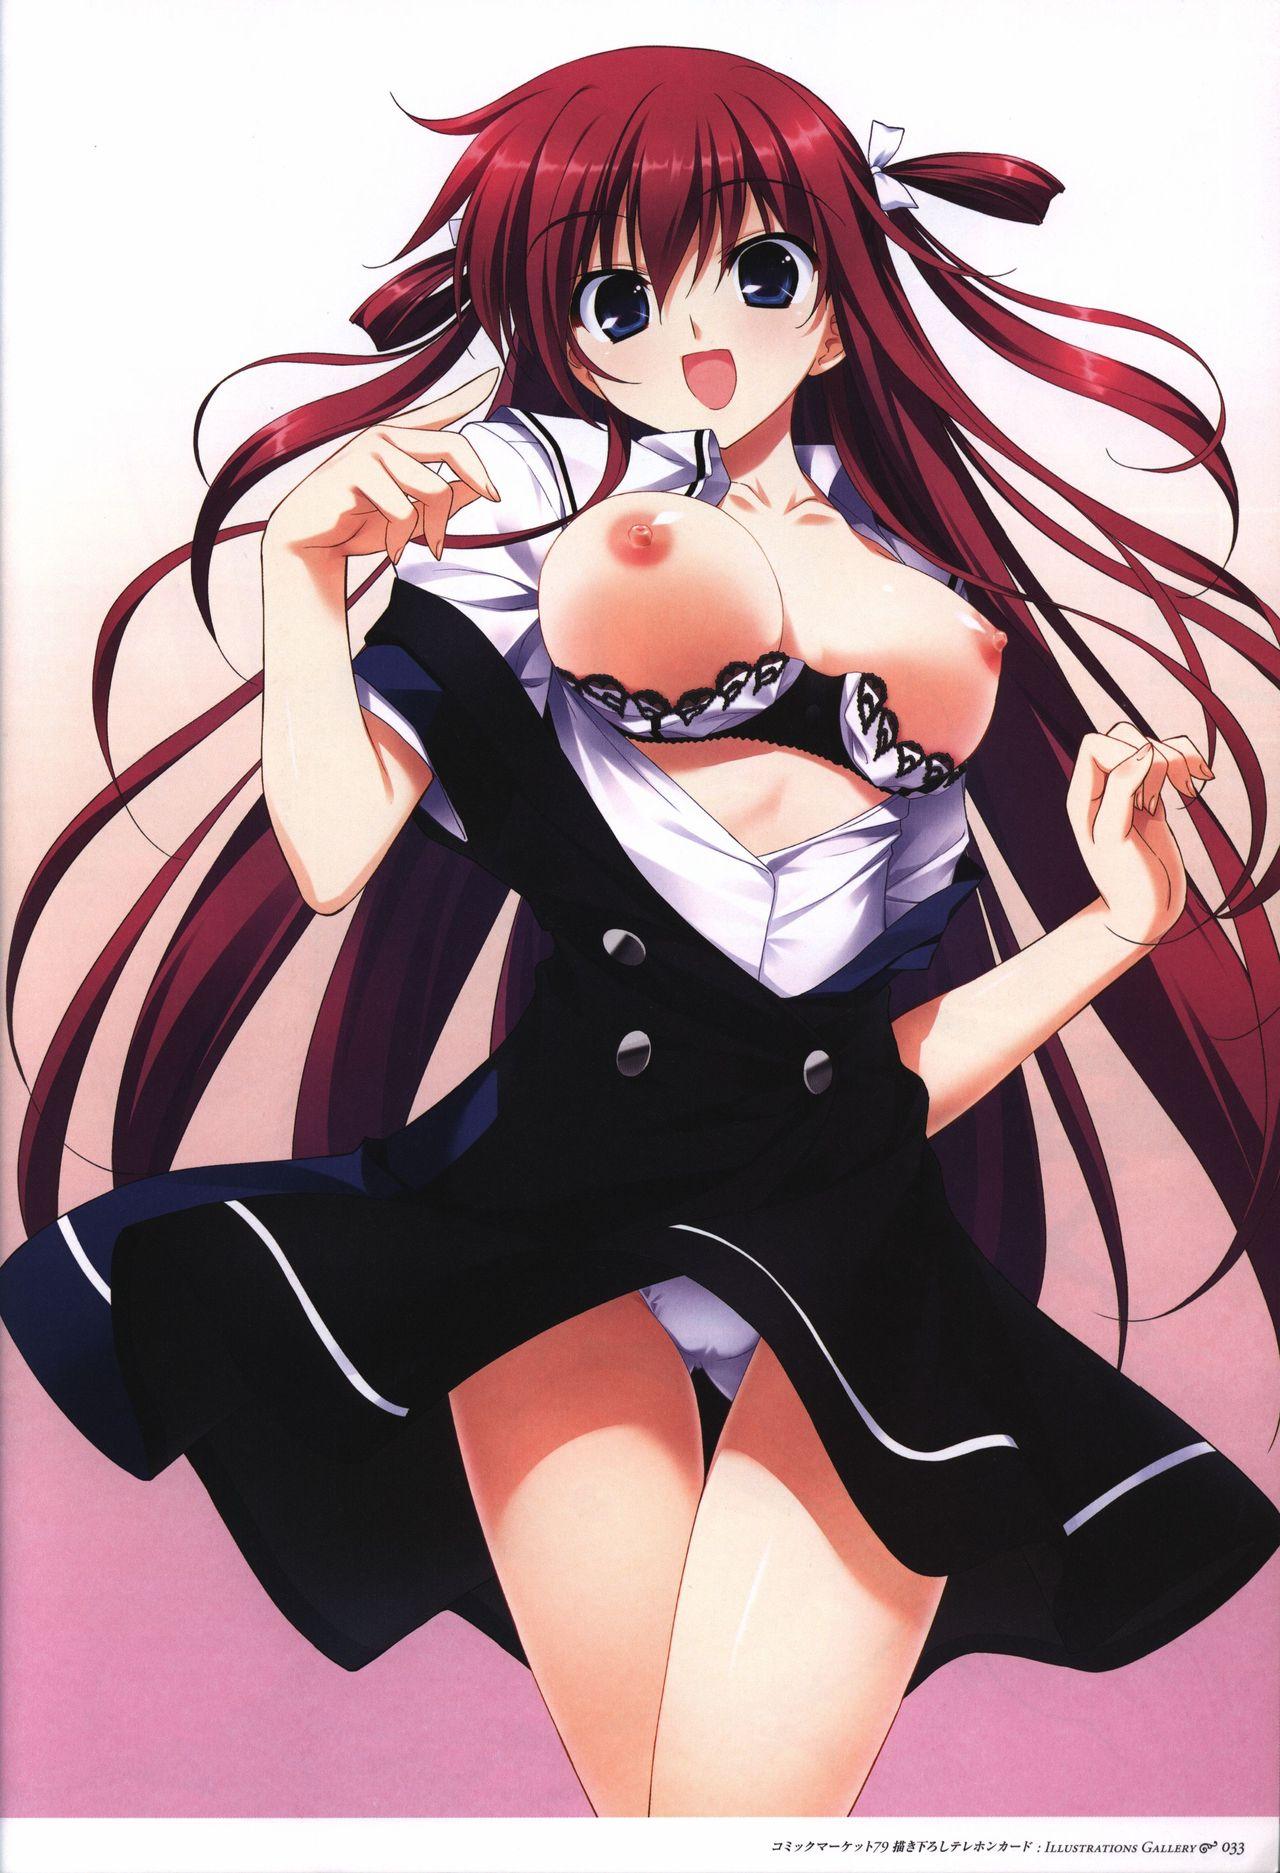 The Fruit of Grisaia Visual FanBook 33